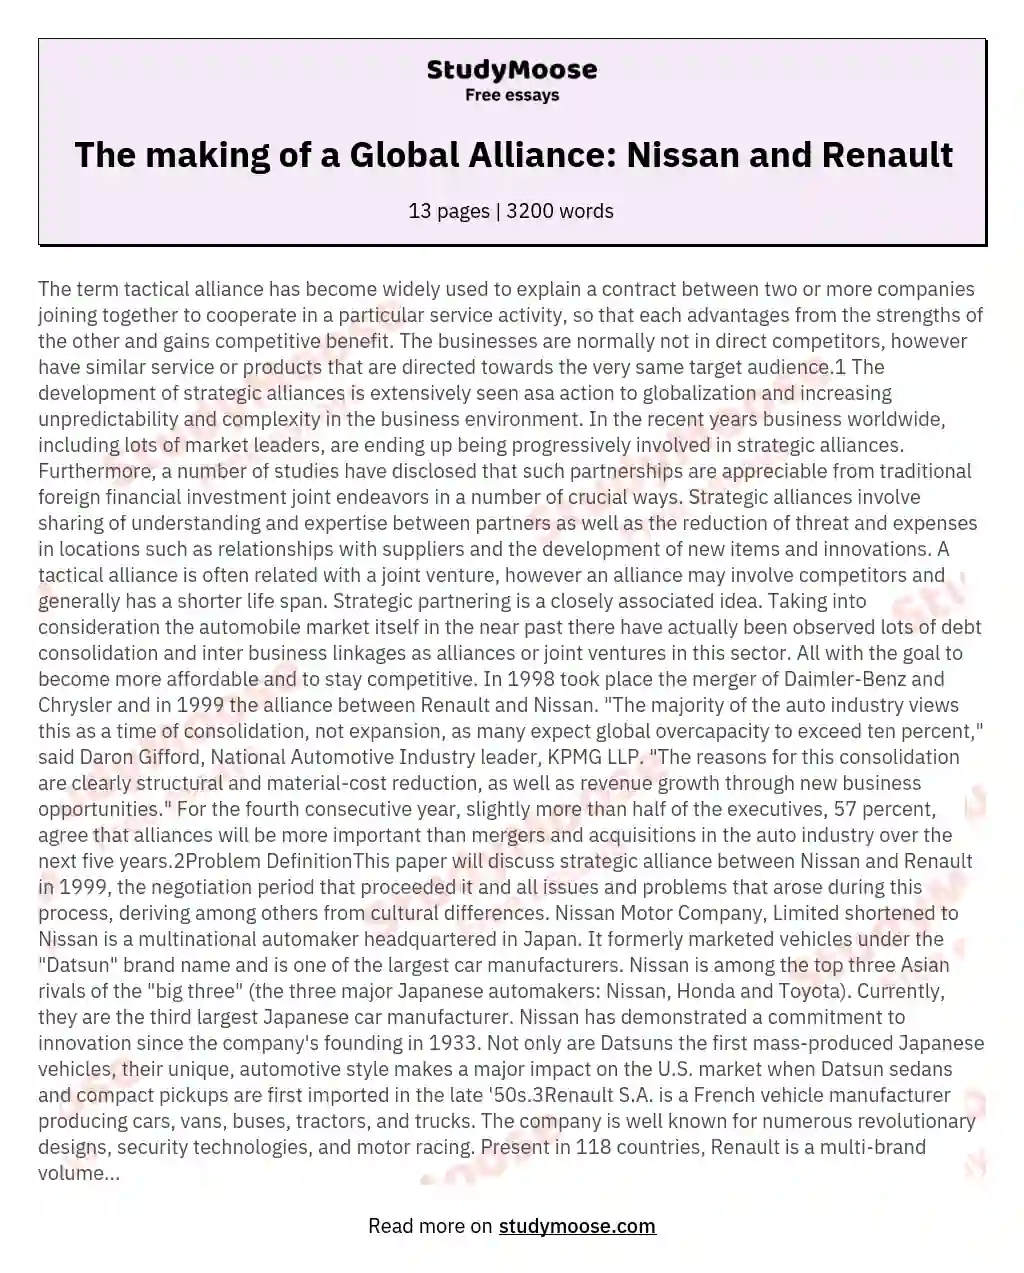 The making of a Global Alliance: Nissan and Renault essay